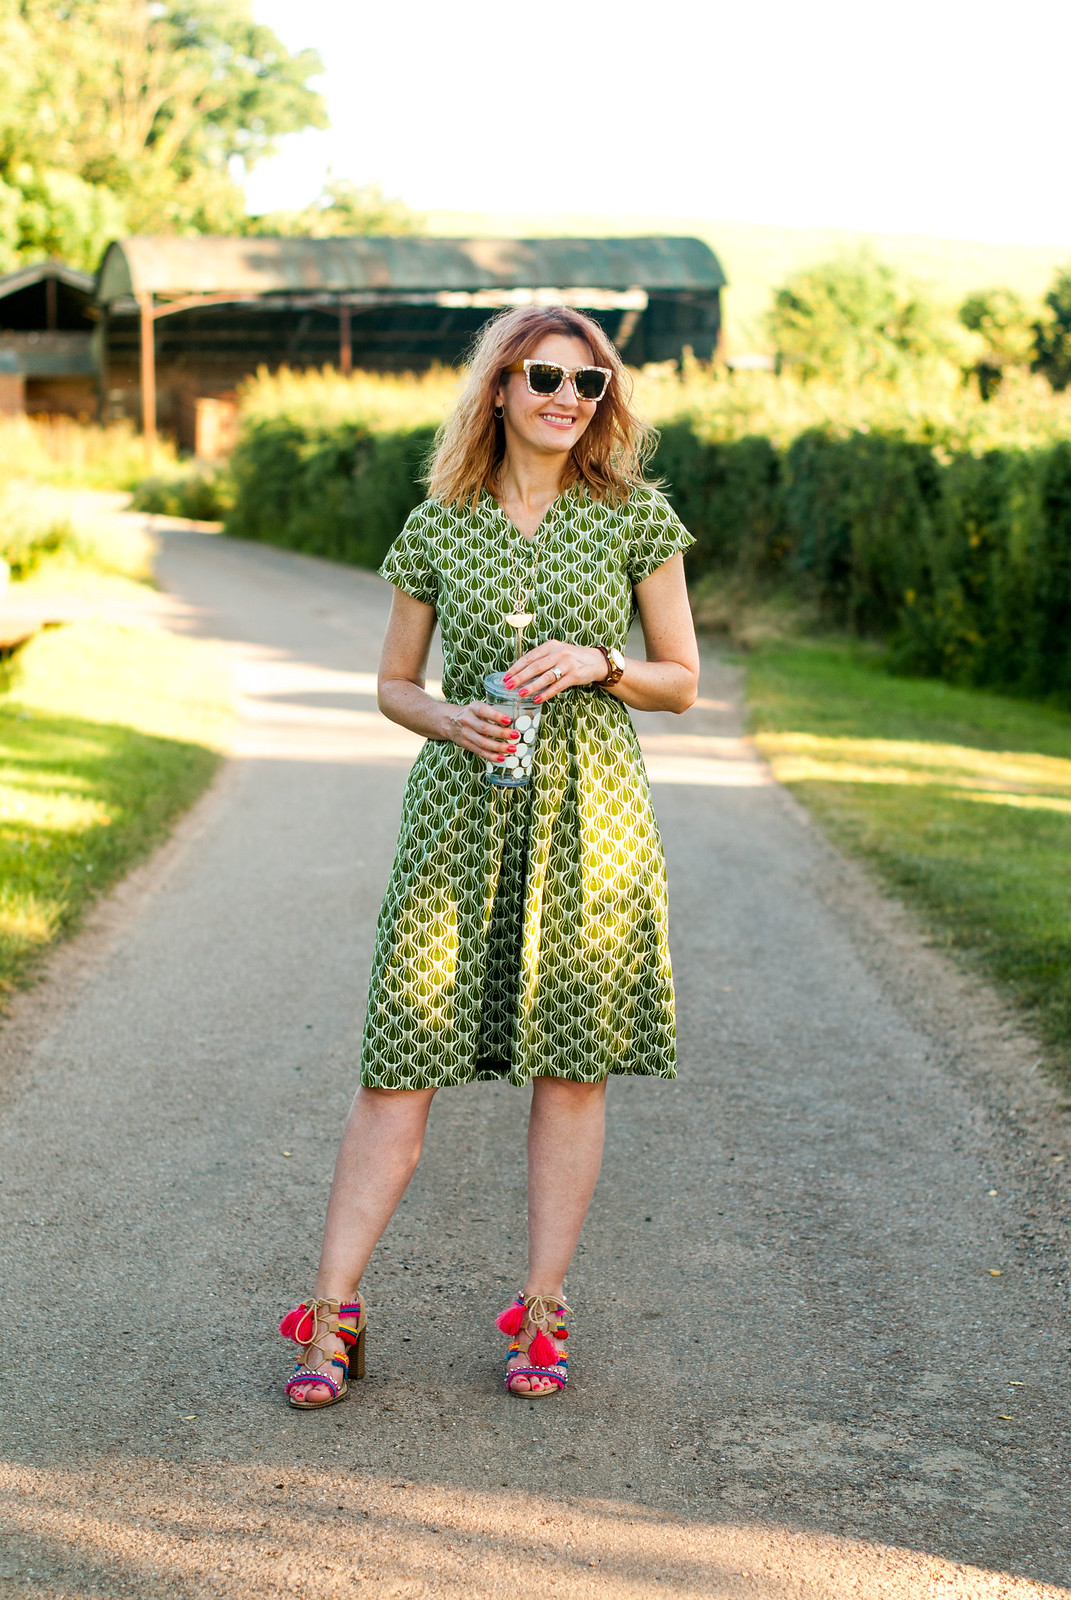 Hot weather style: Printed green summer dress pompom and tassel embellished sandals | Not Dressed As Lamb, over 40 style